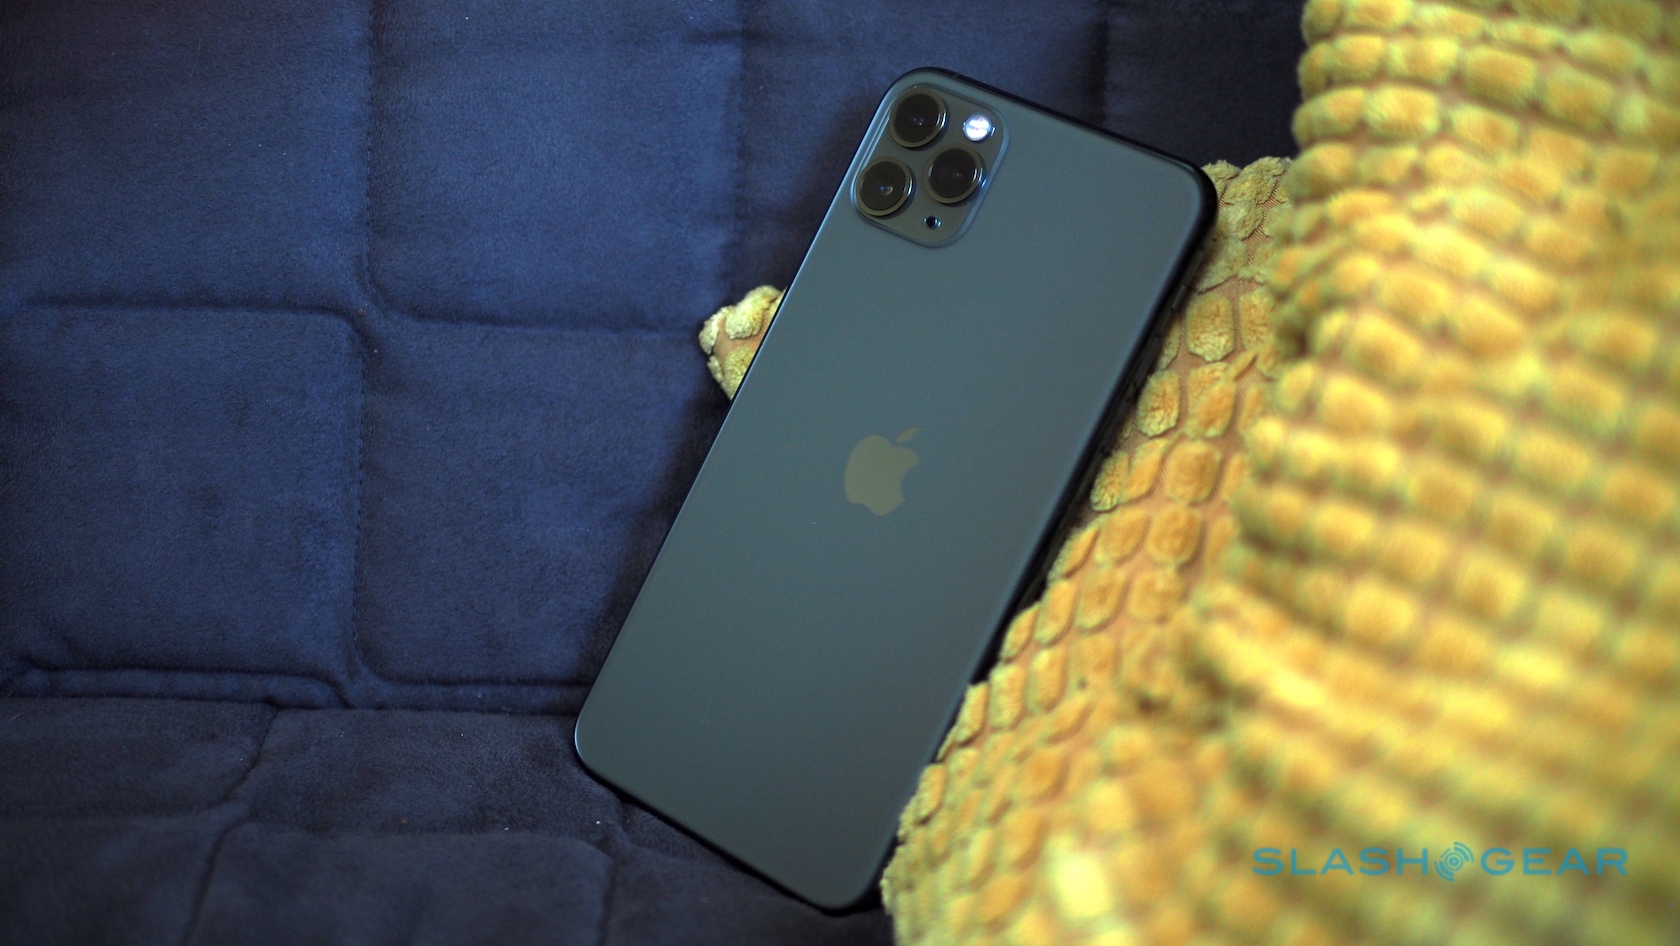 The Midnight Green iPhone 11 Pro is living up to 